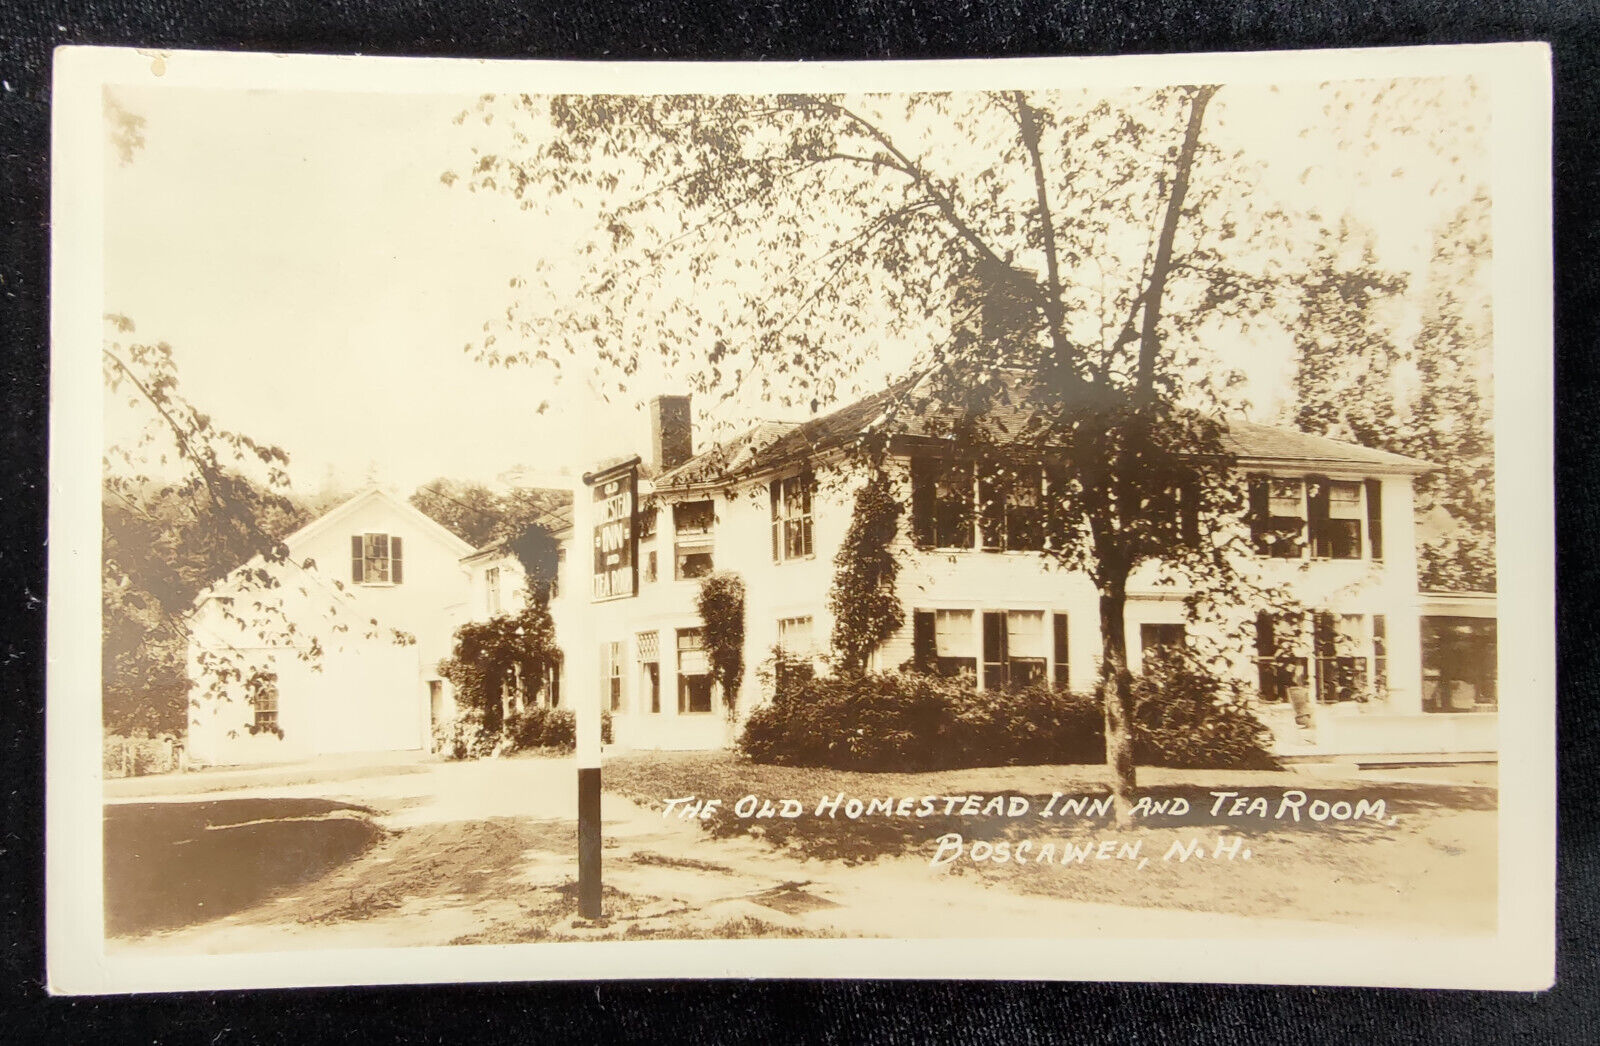 BW RPPC The Old Homestead Inn and Tea Room~Boscawen NH~ Unposted